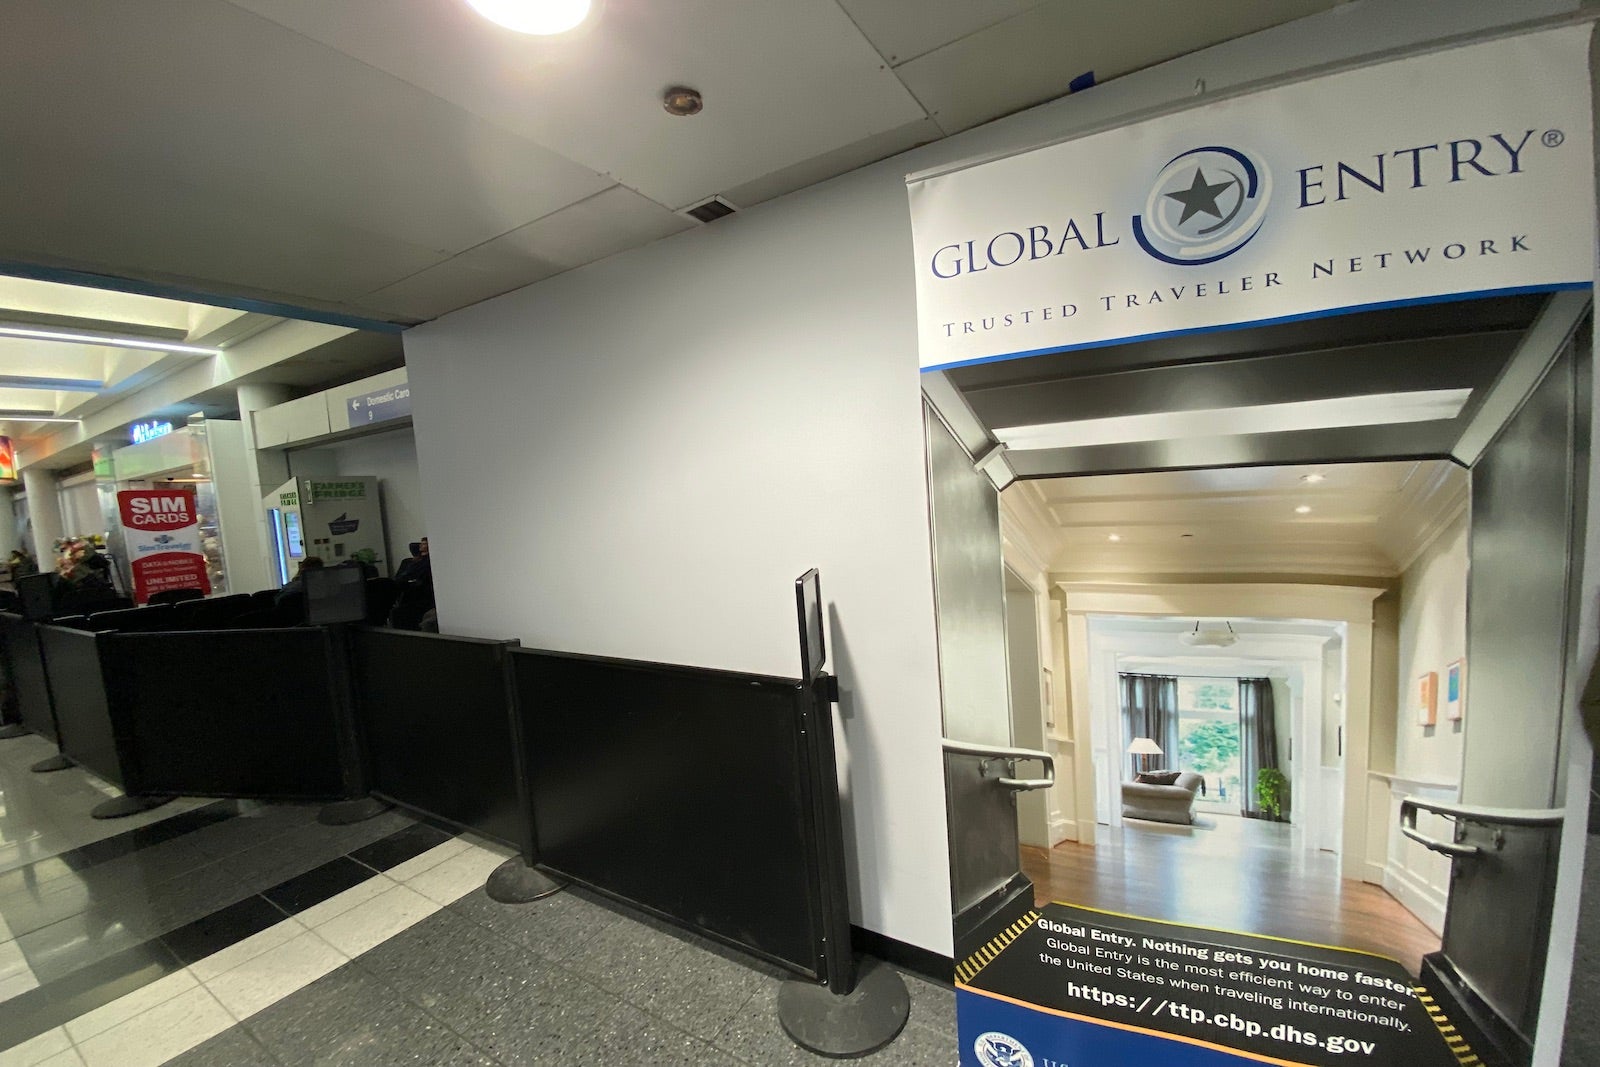 If you've been struggling to find a Global Entry interview, try this